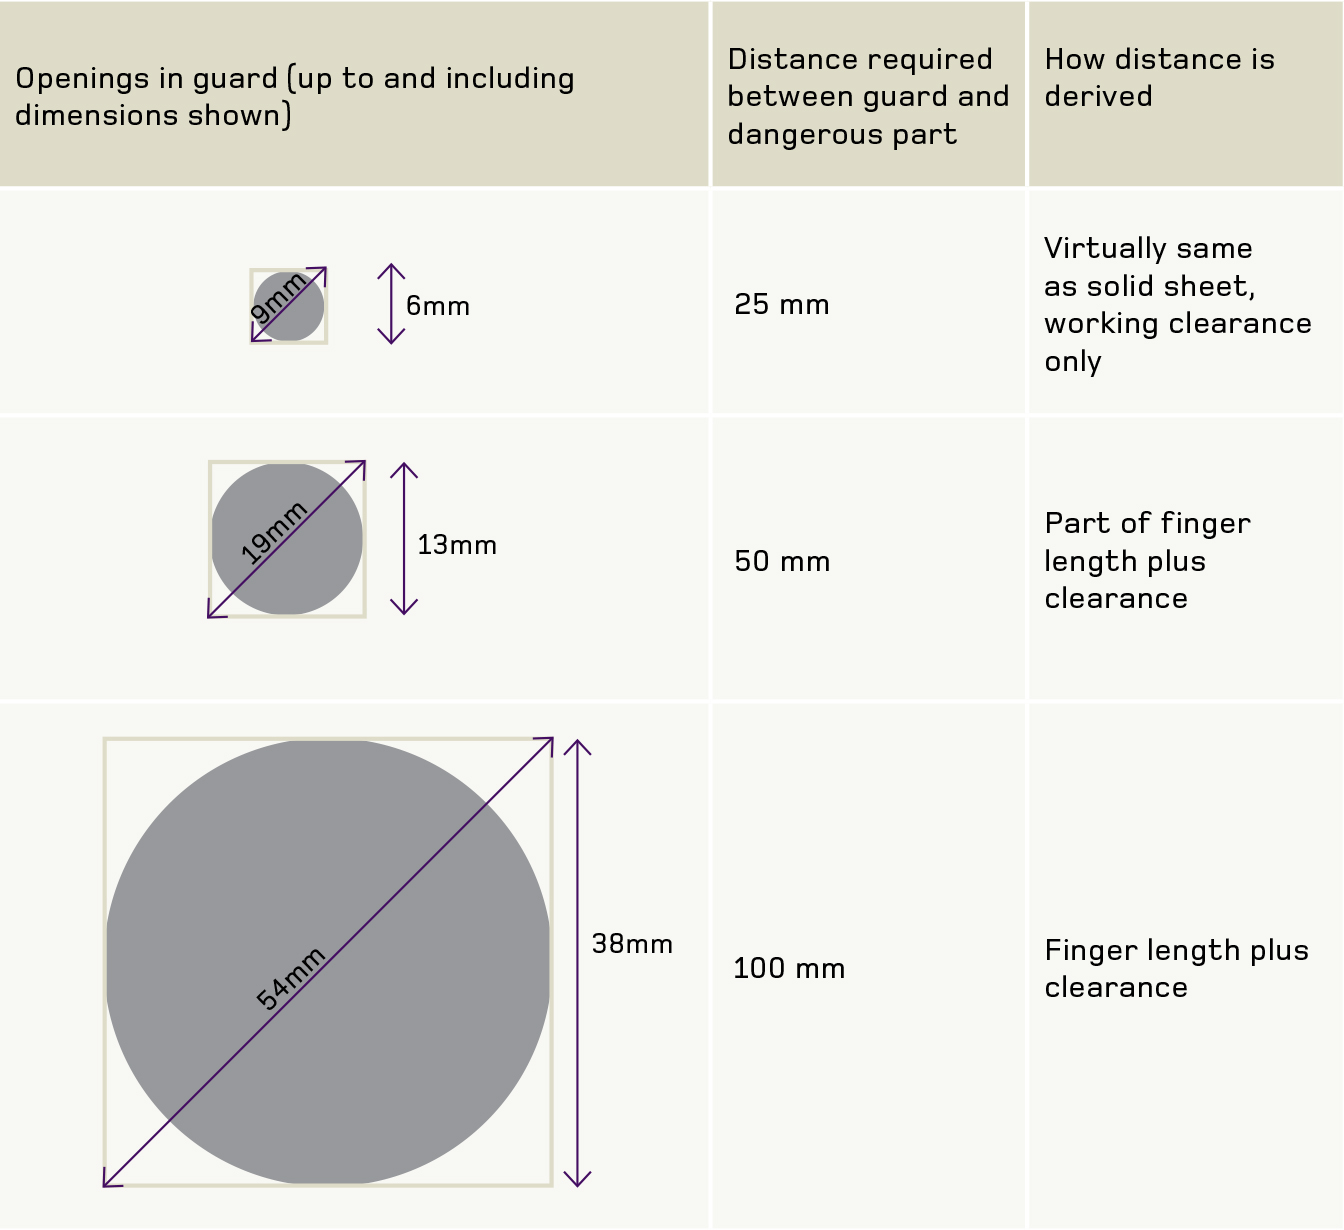 [image] table 3: Restrictions on reach though square and round openings and distances required between guarding and the dangerous part